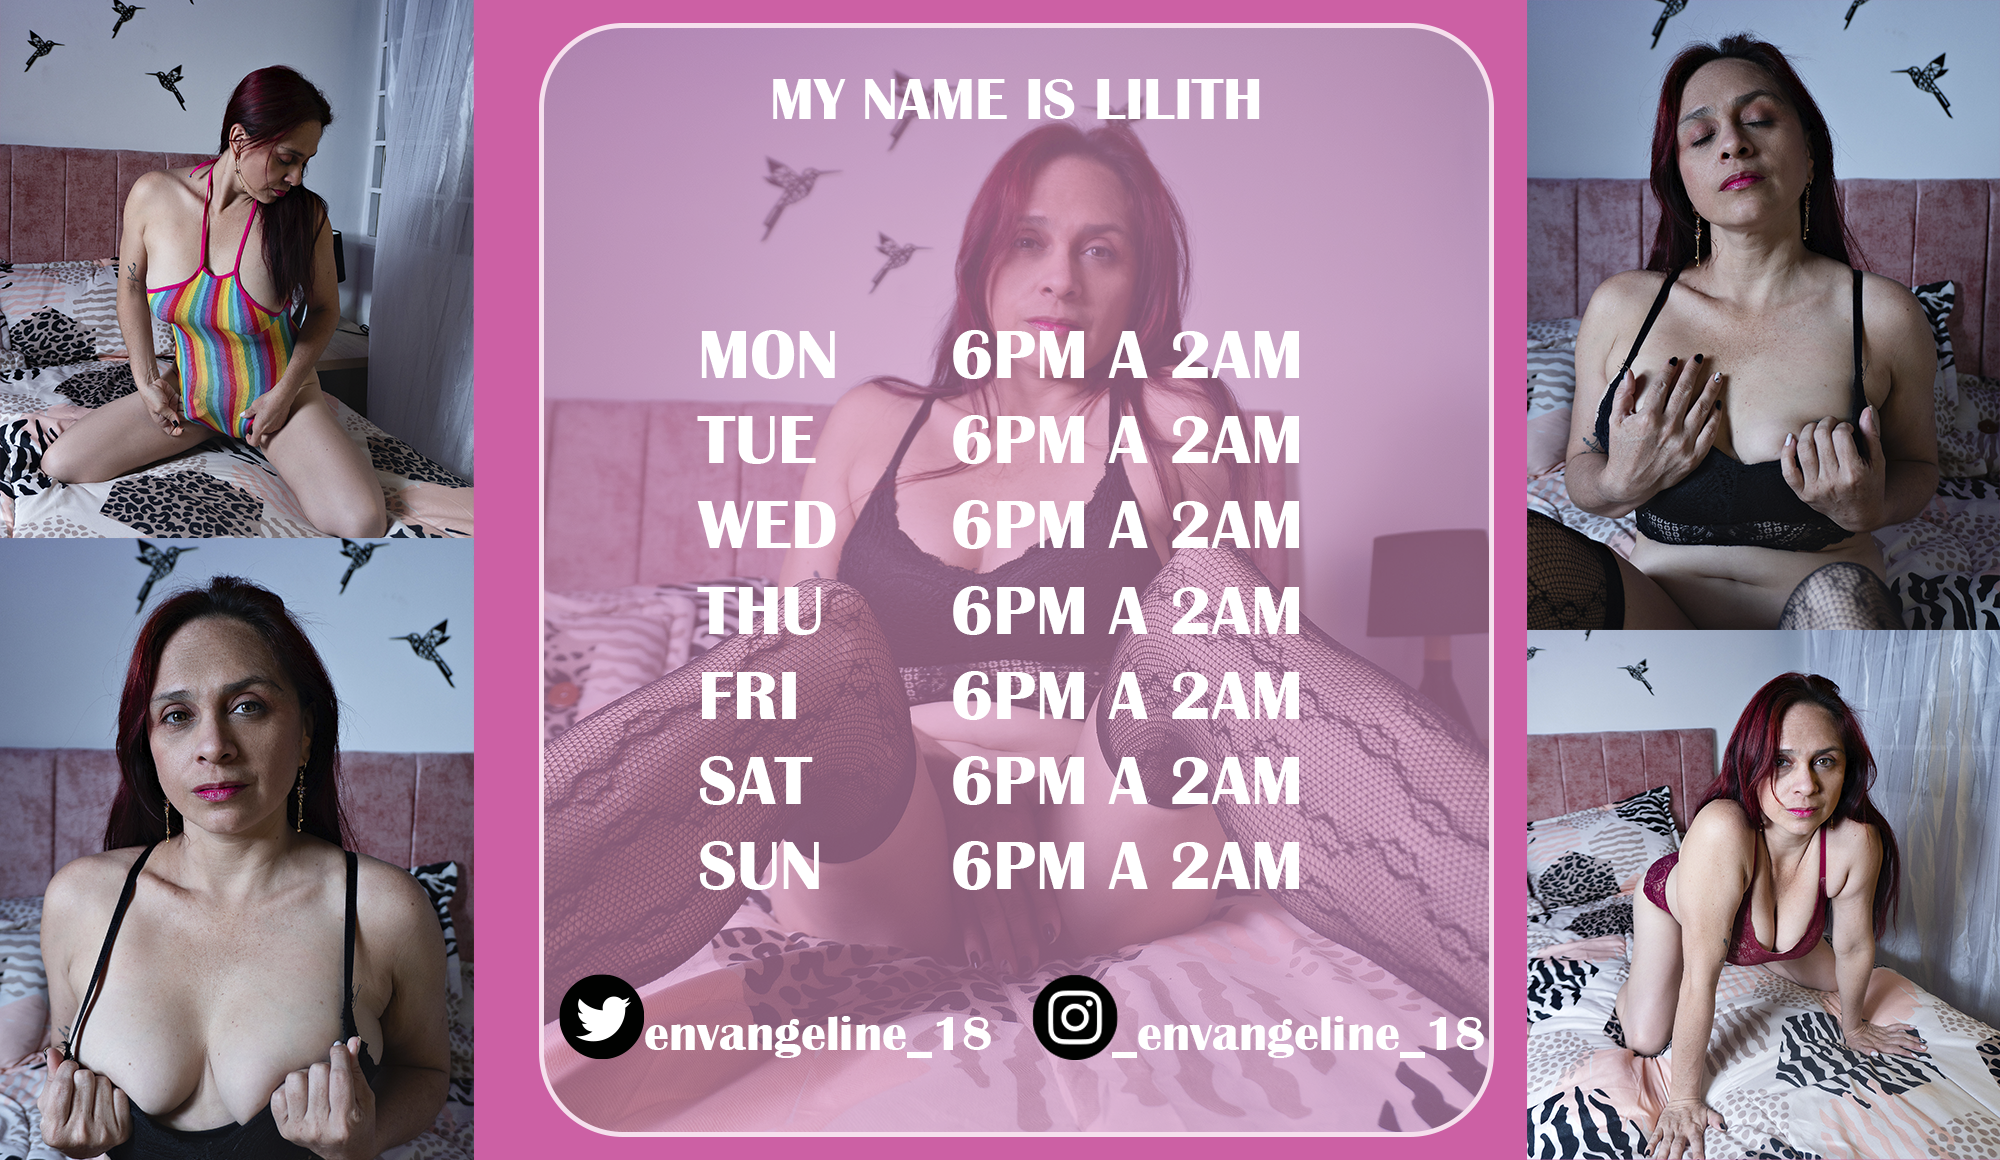 Lilith-collins Schedule image: 1